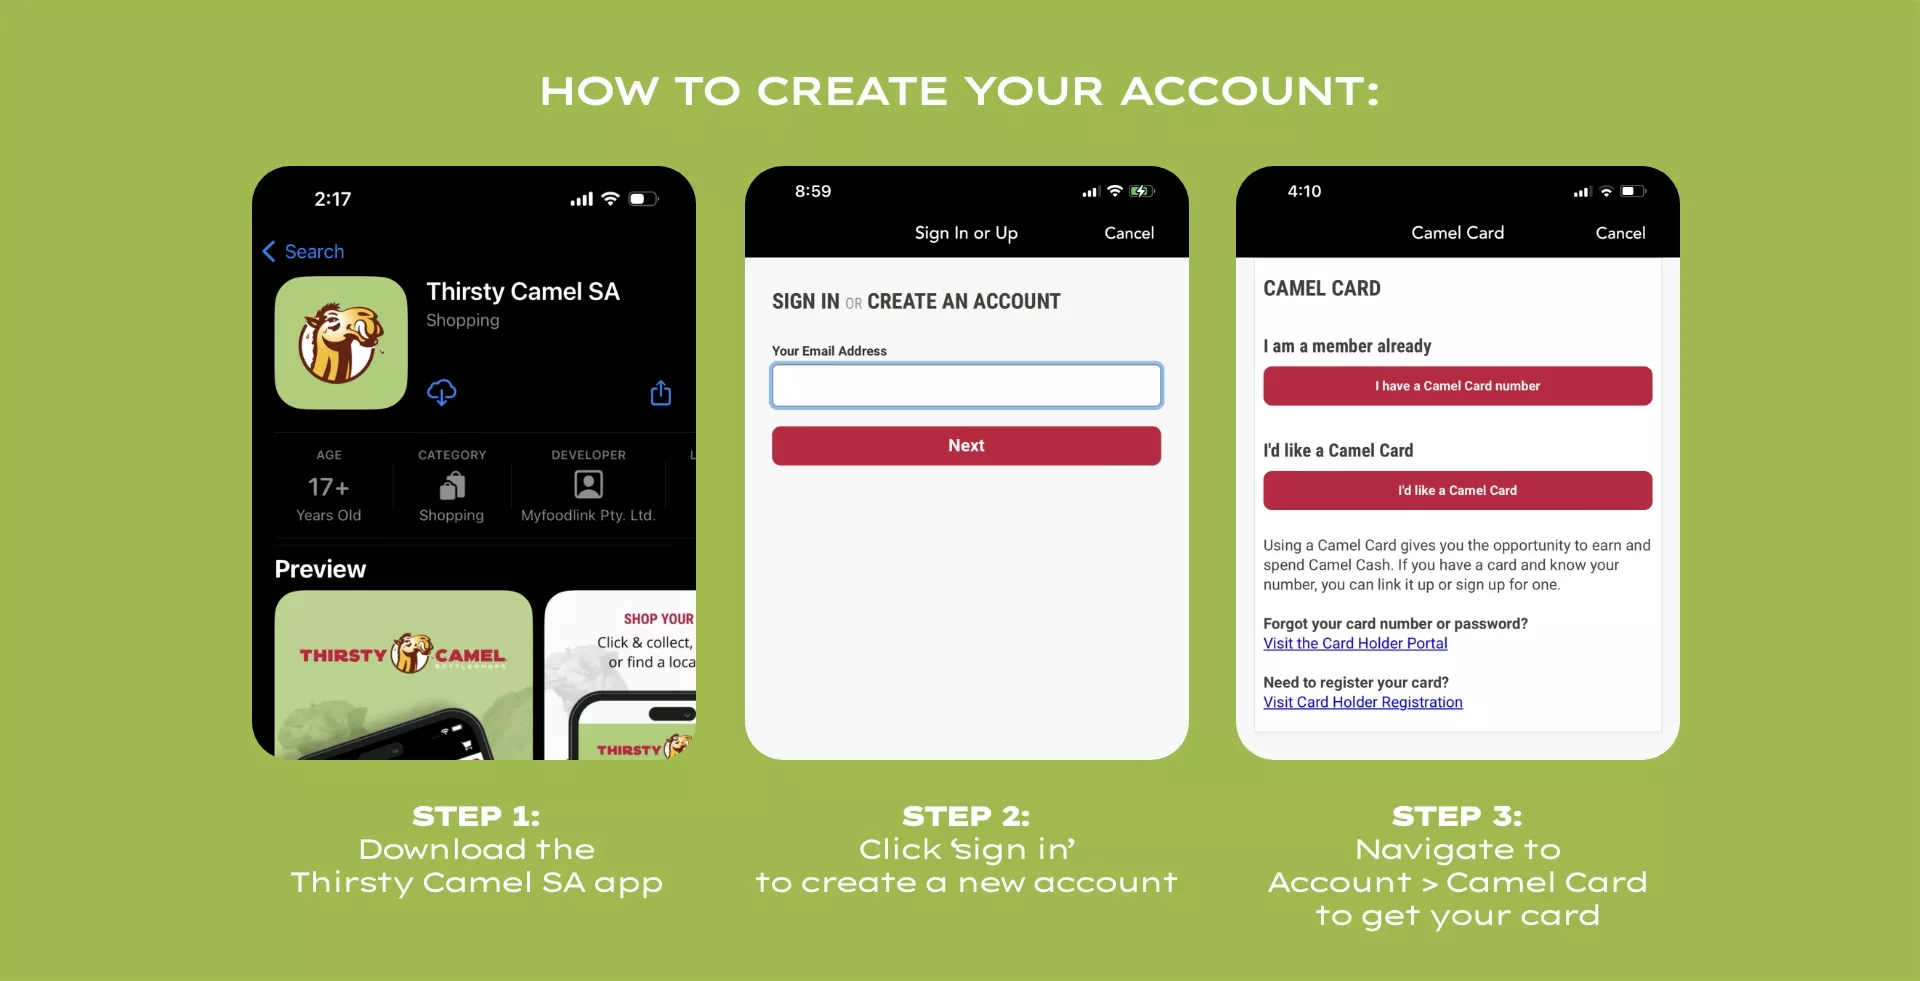 create an account within the app